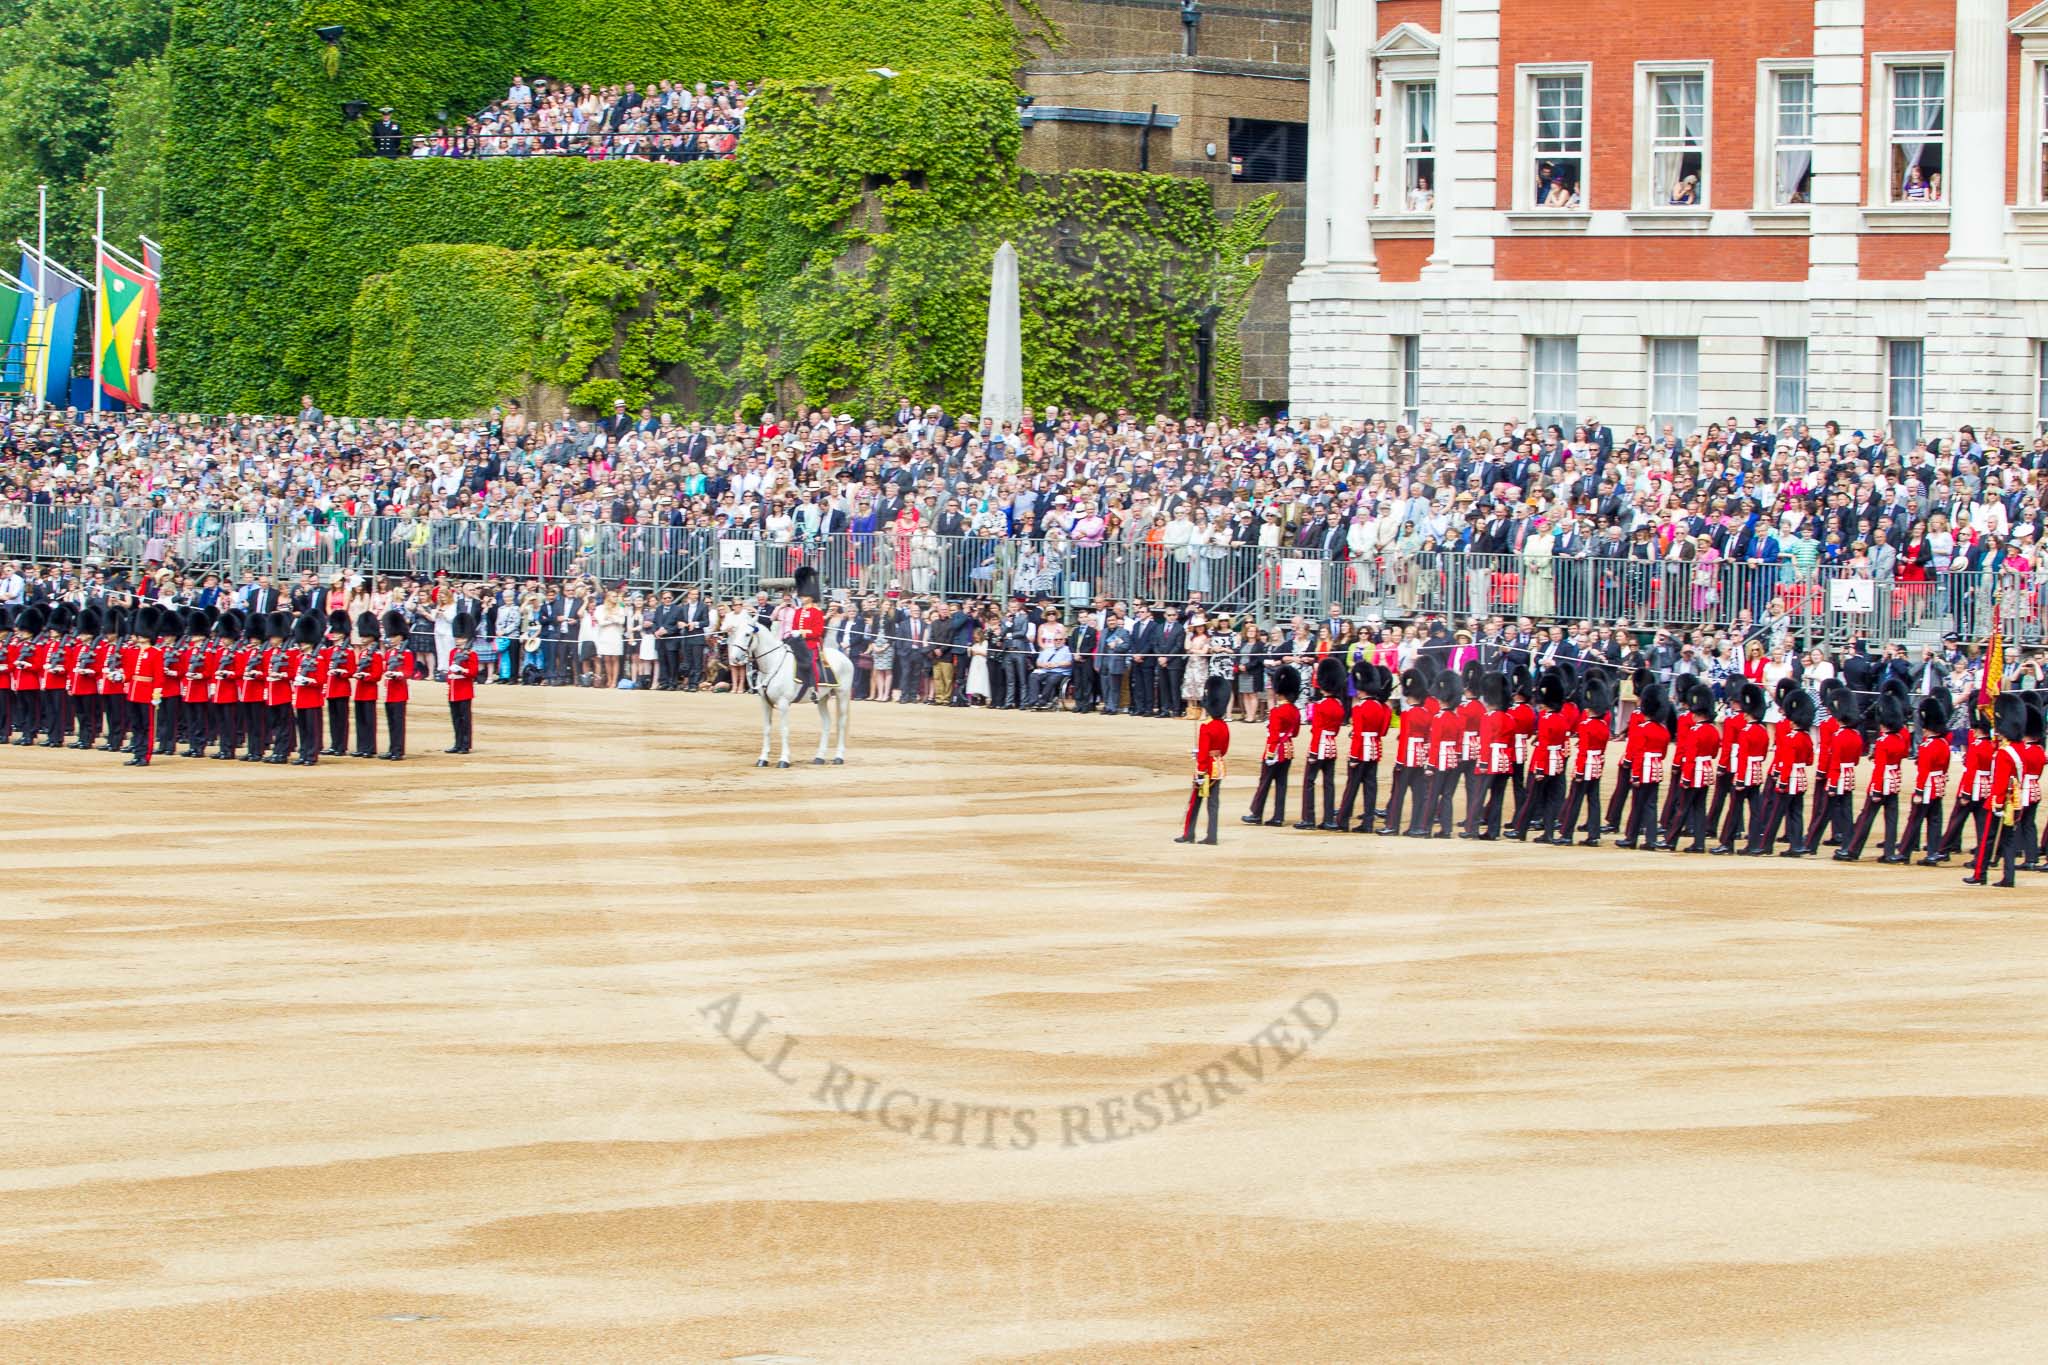 Trooping the Colour 2014.
Horse Guards Parade, Westminster,
London SW1A,

United Kingdom,
on 14 June 2014 at 11:25, image #552